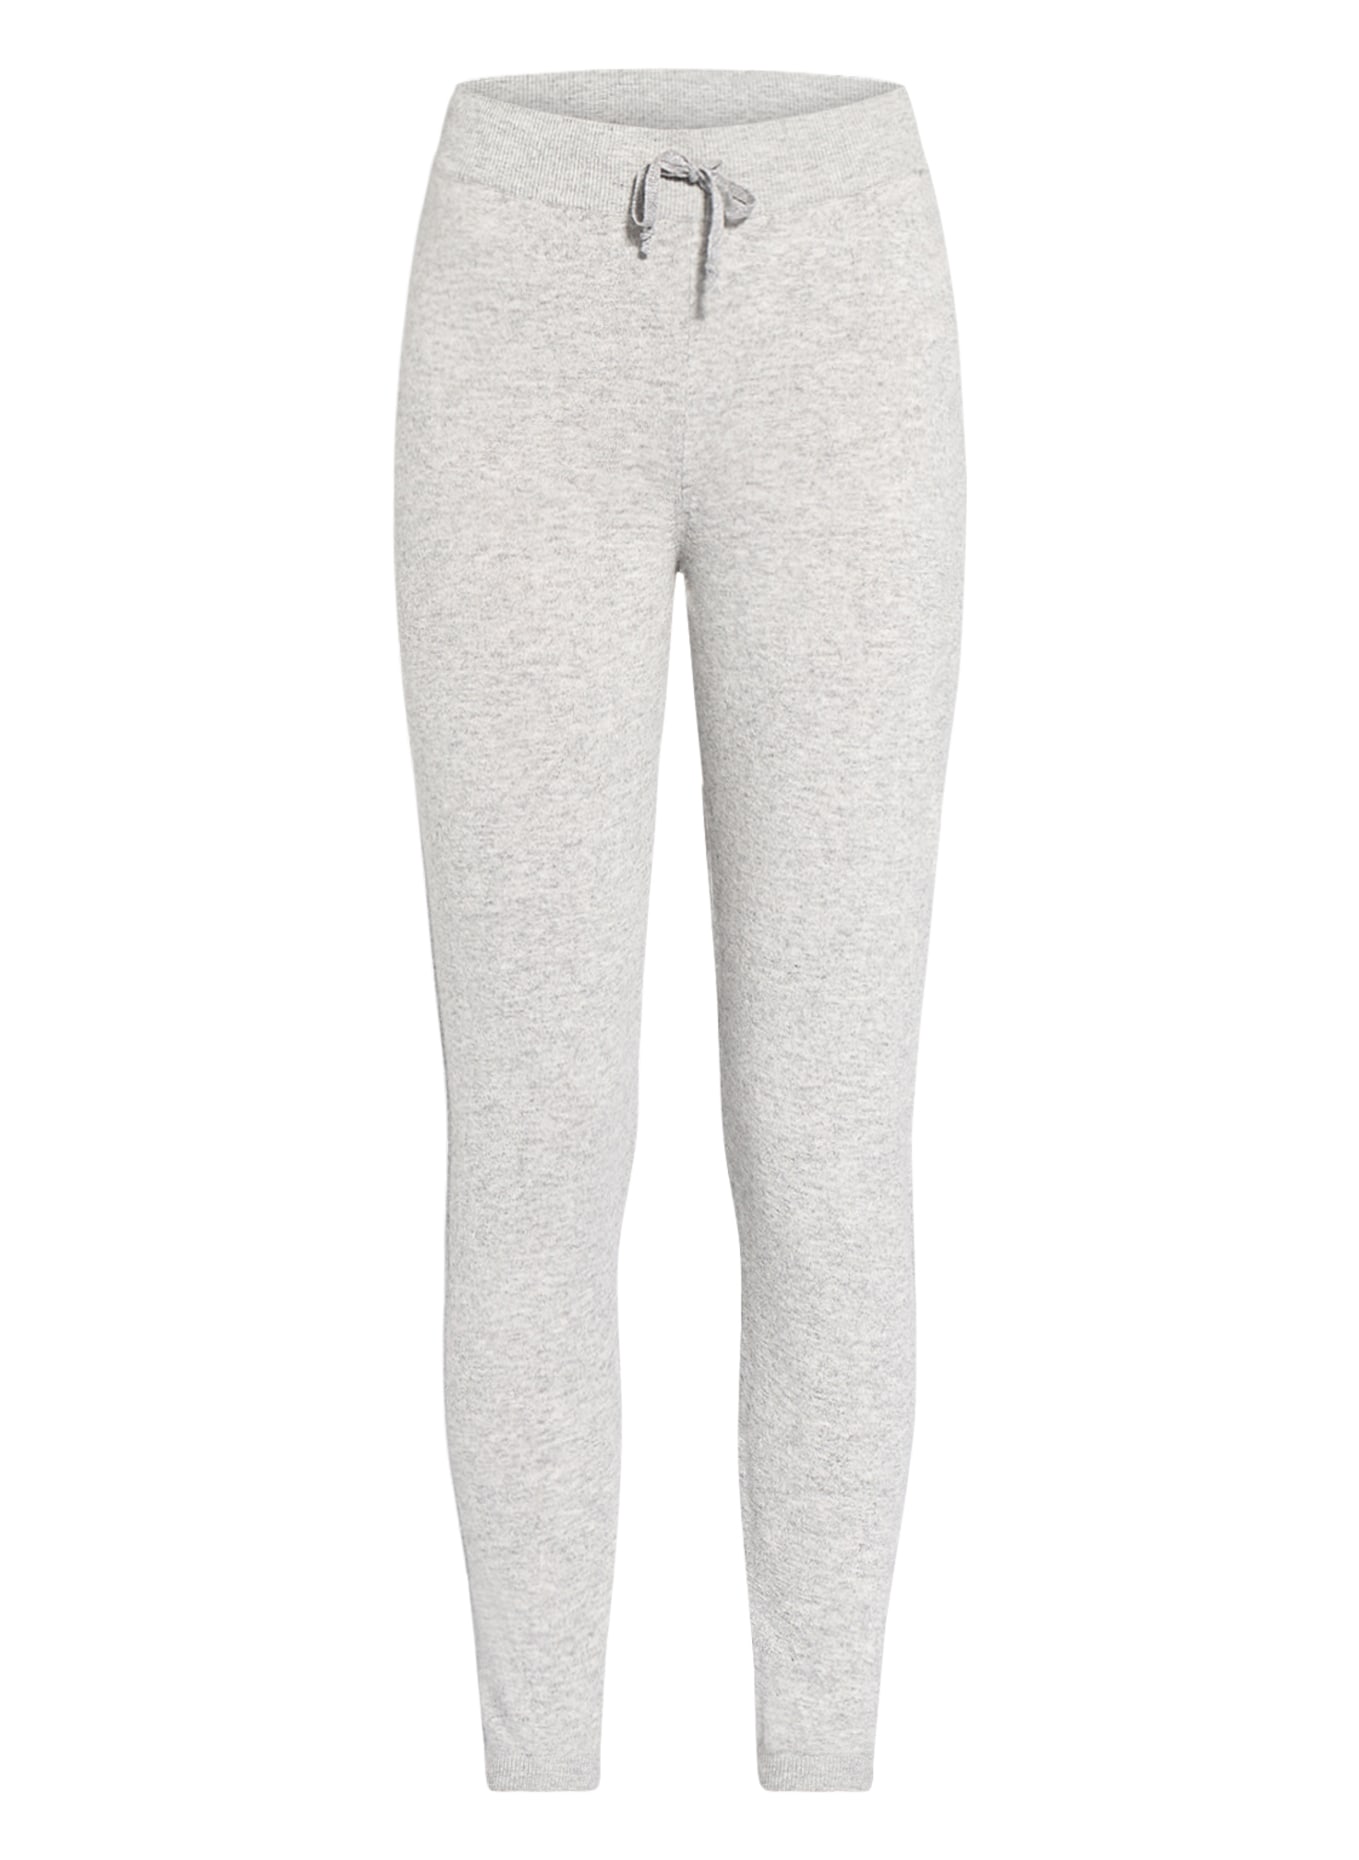 DEHA Knit fitness trousers, Color: LIGHT GRAY (Image 1)